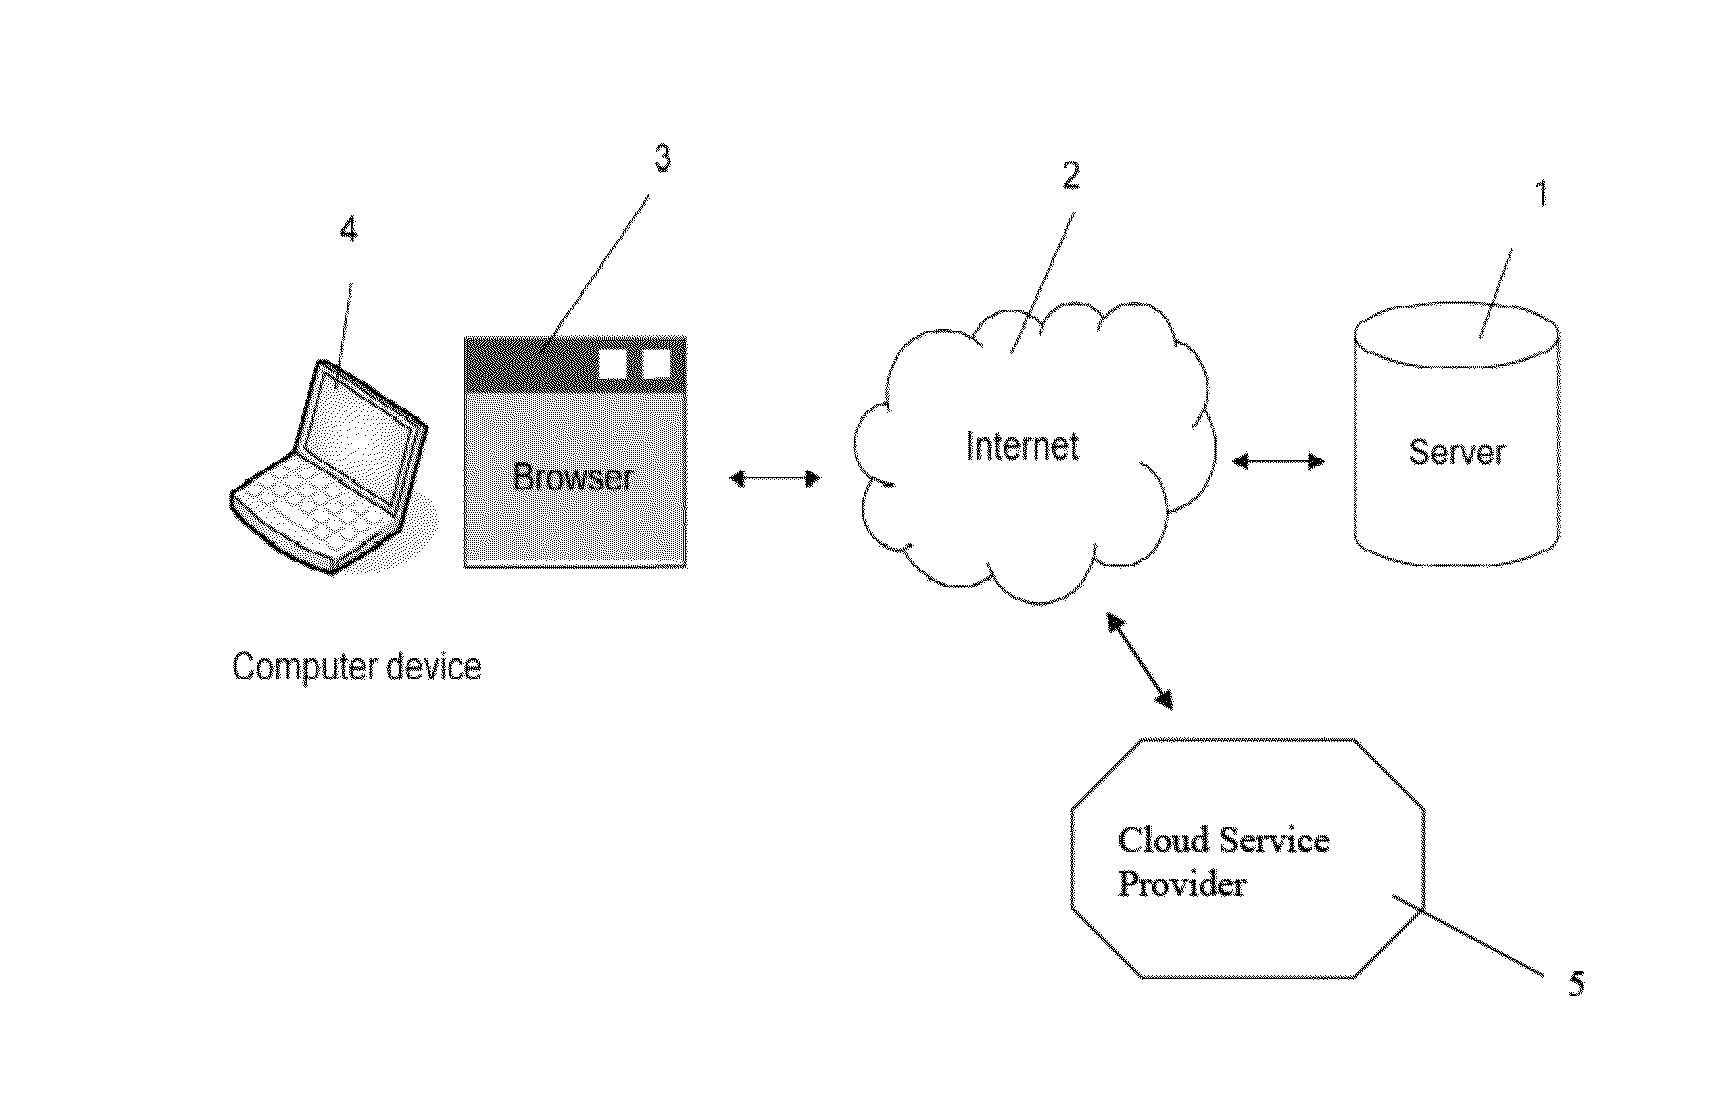 Method for secure storing and sharing of a data file via a computer communication network and open cloud services